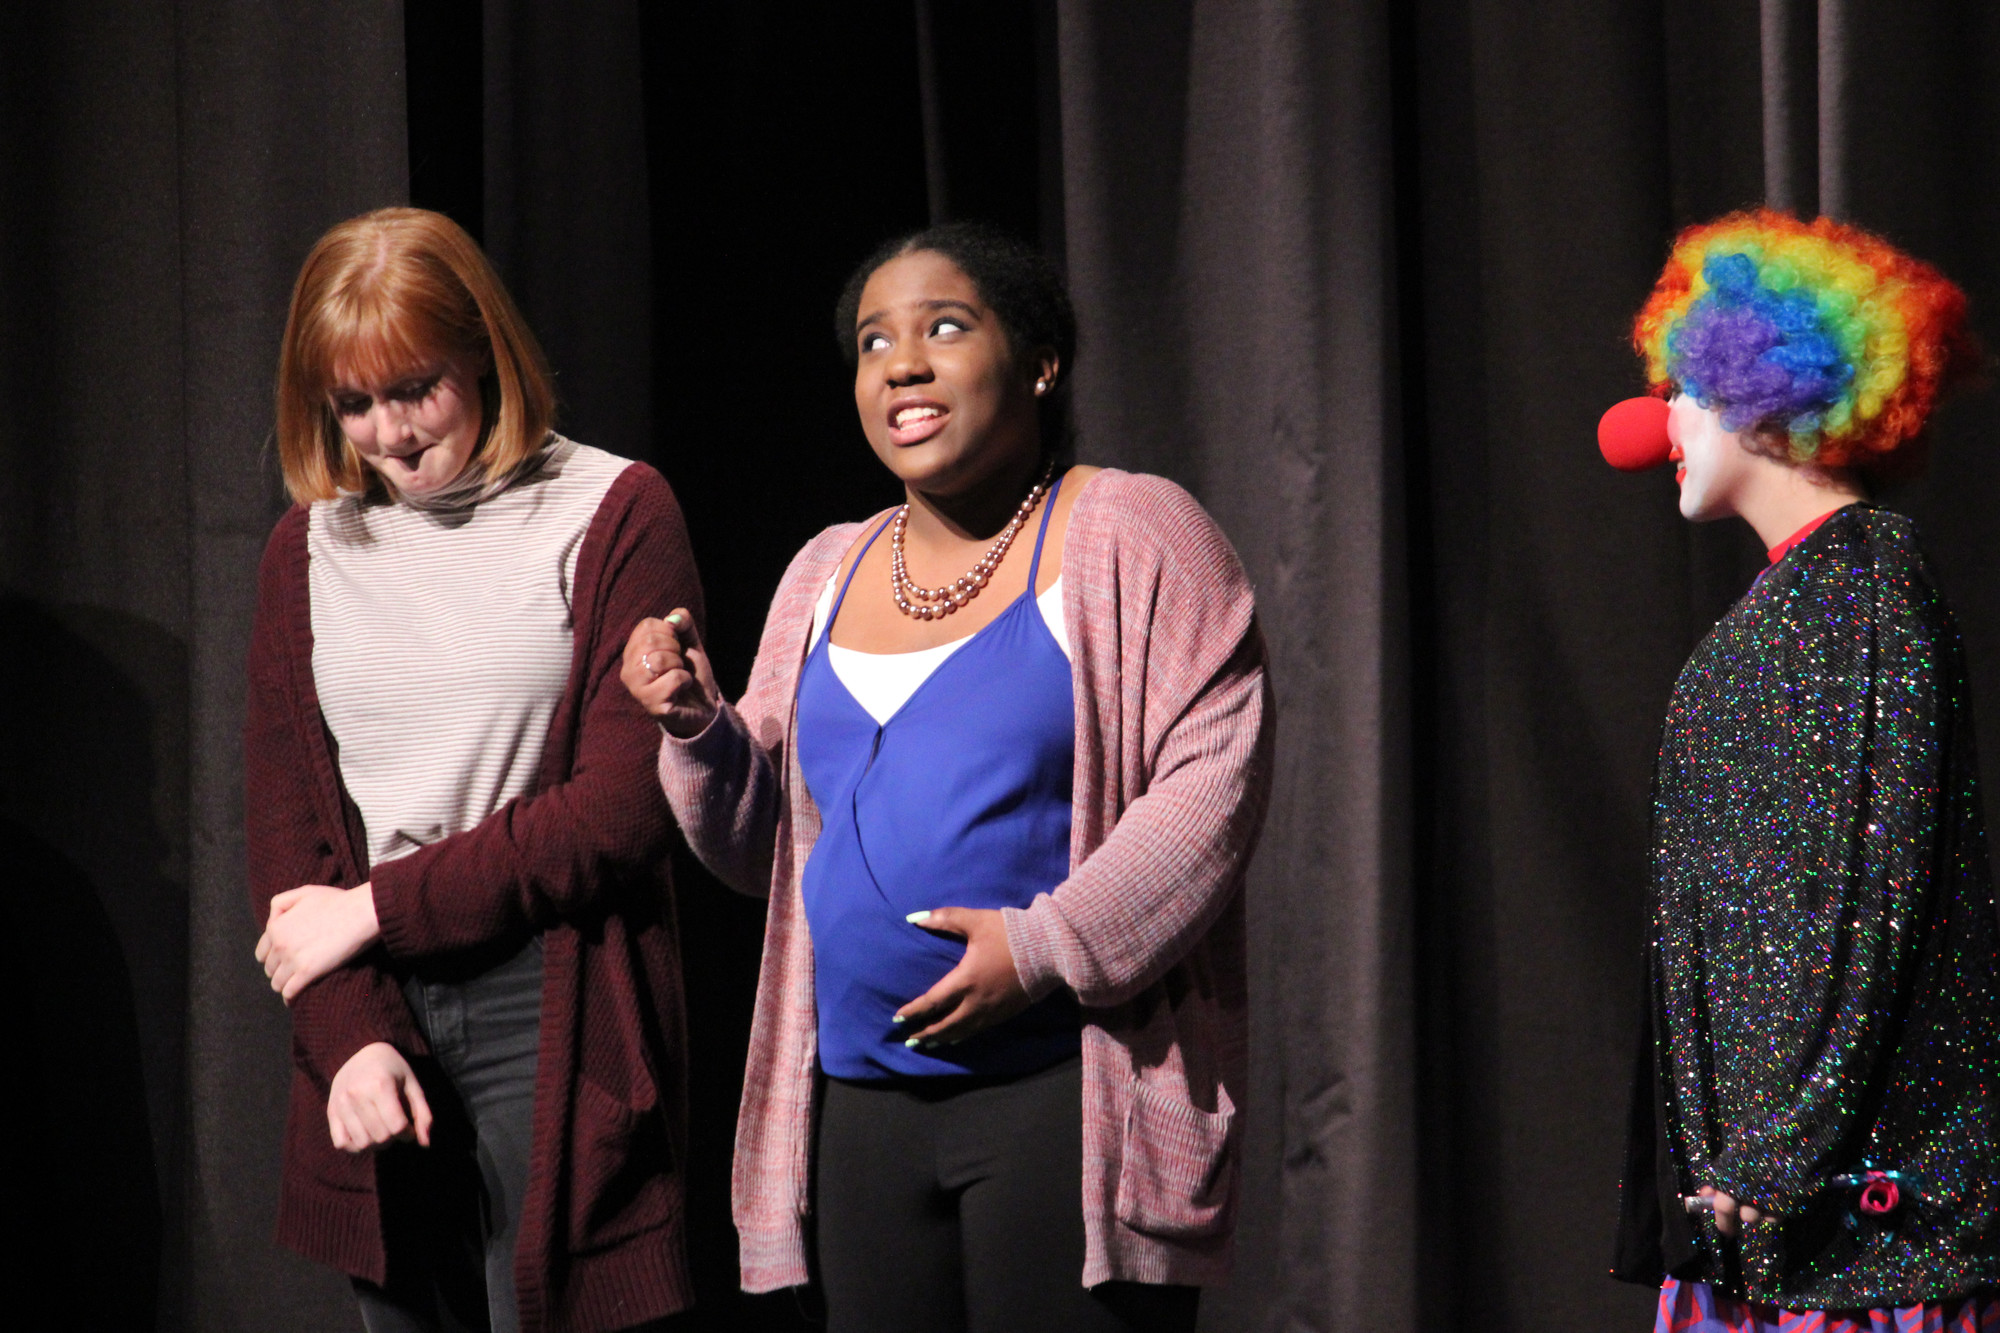 Nathanaah Prophete, center, played a very anxious, very pregnant woman trapped on an elevator with an assortment of characters, such as an instructor, played by Emma Vecchione, left, and a clown, played by Agatha O’Connell.